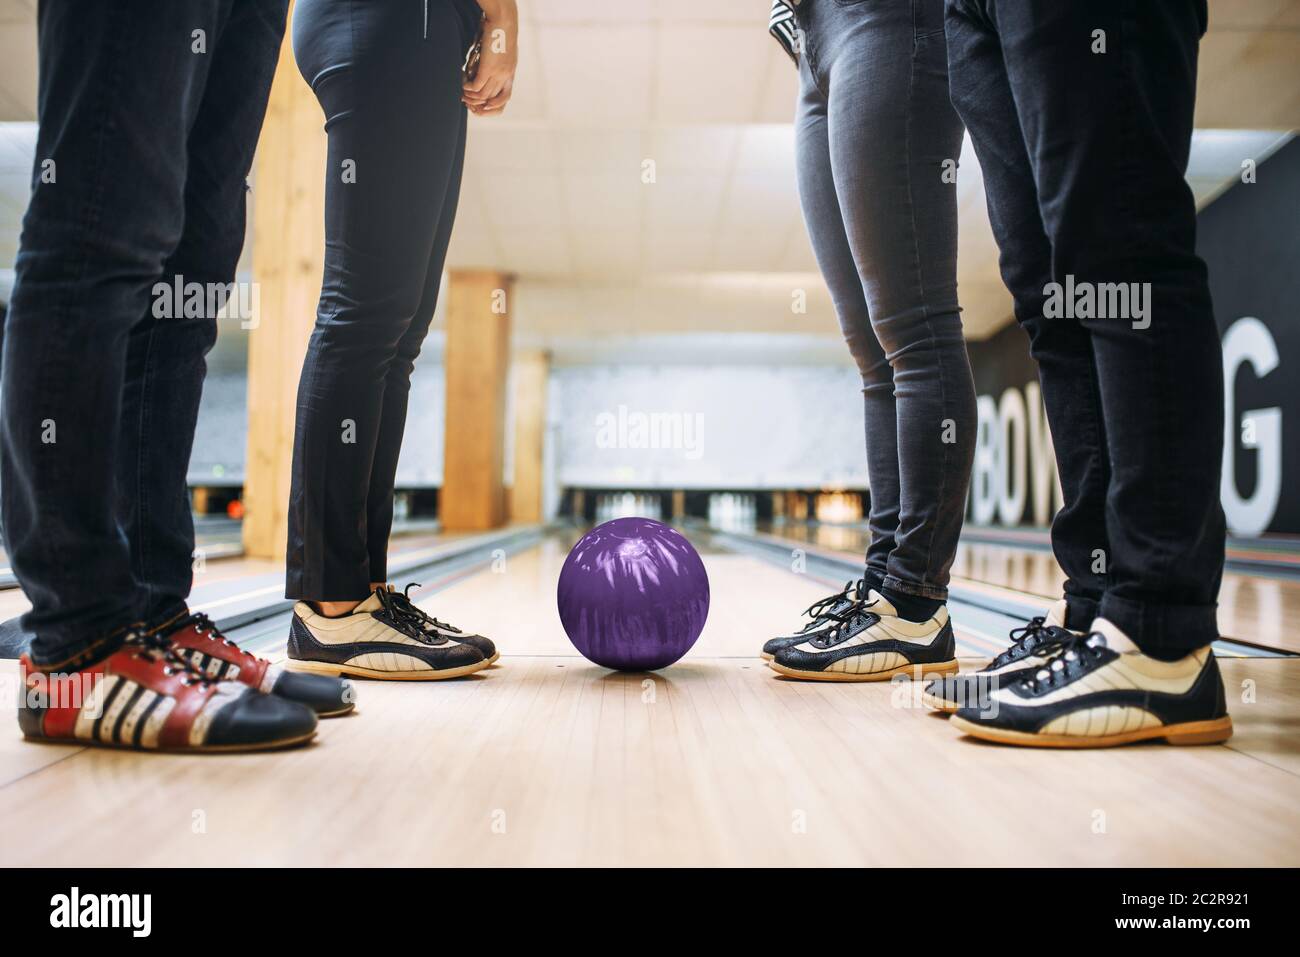 Bowling alley team, feet of the players in house shoes and ball on lane. Friends playing the game in club, active leisure Stock Photo